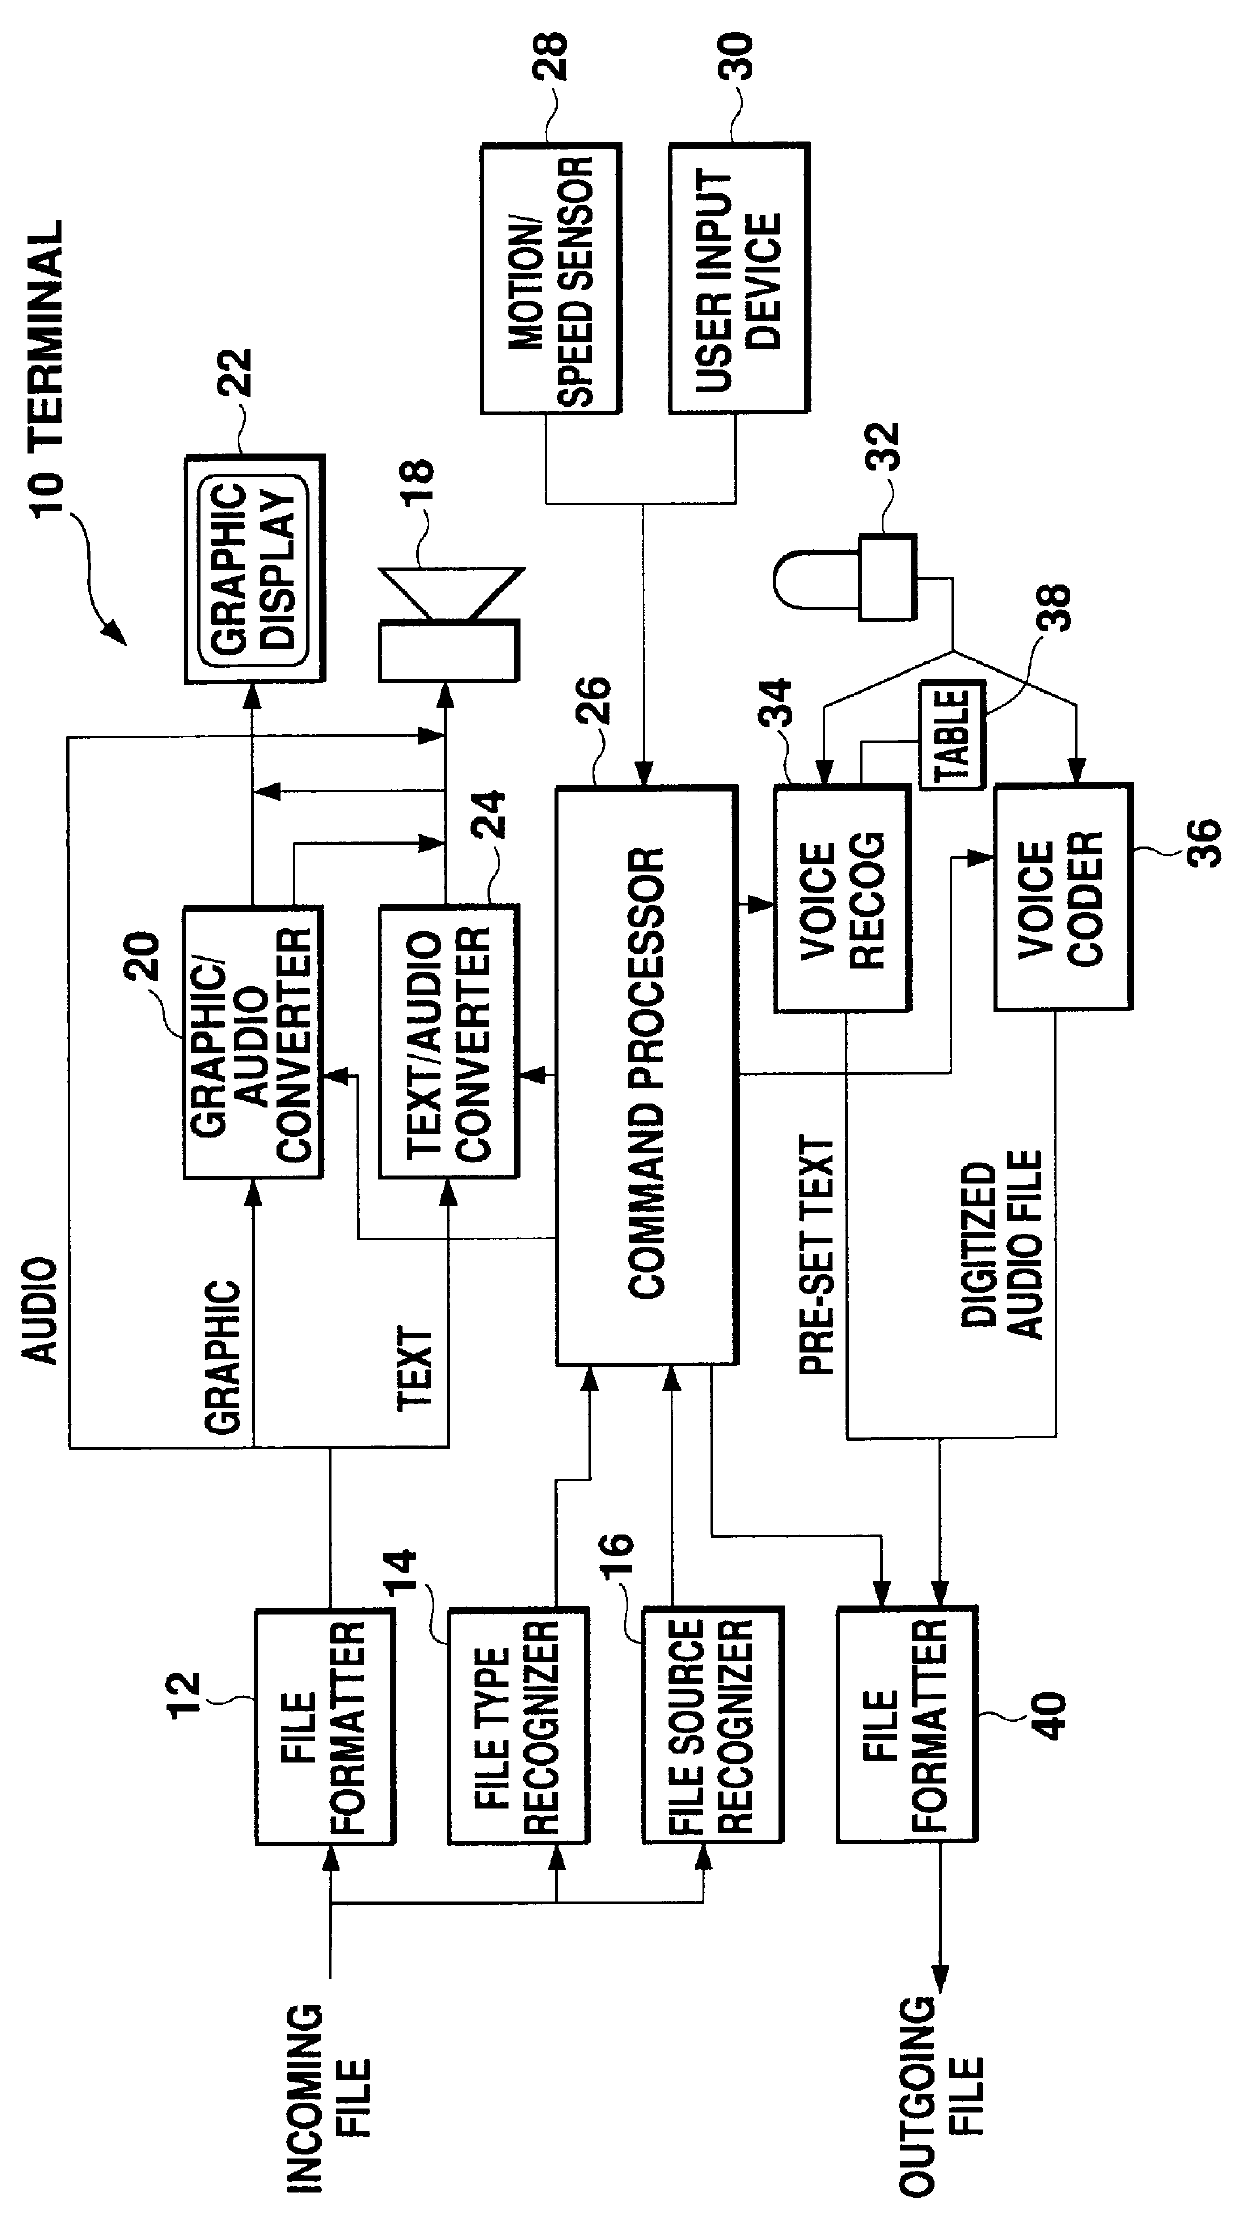 Communication system for controlling data processing according to a state of a communication terminal device